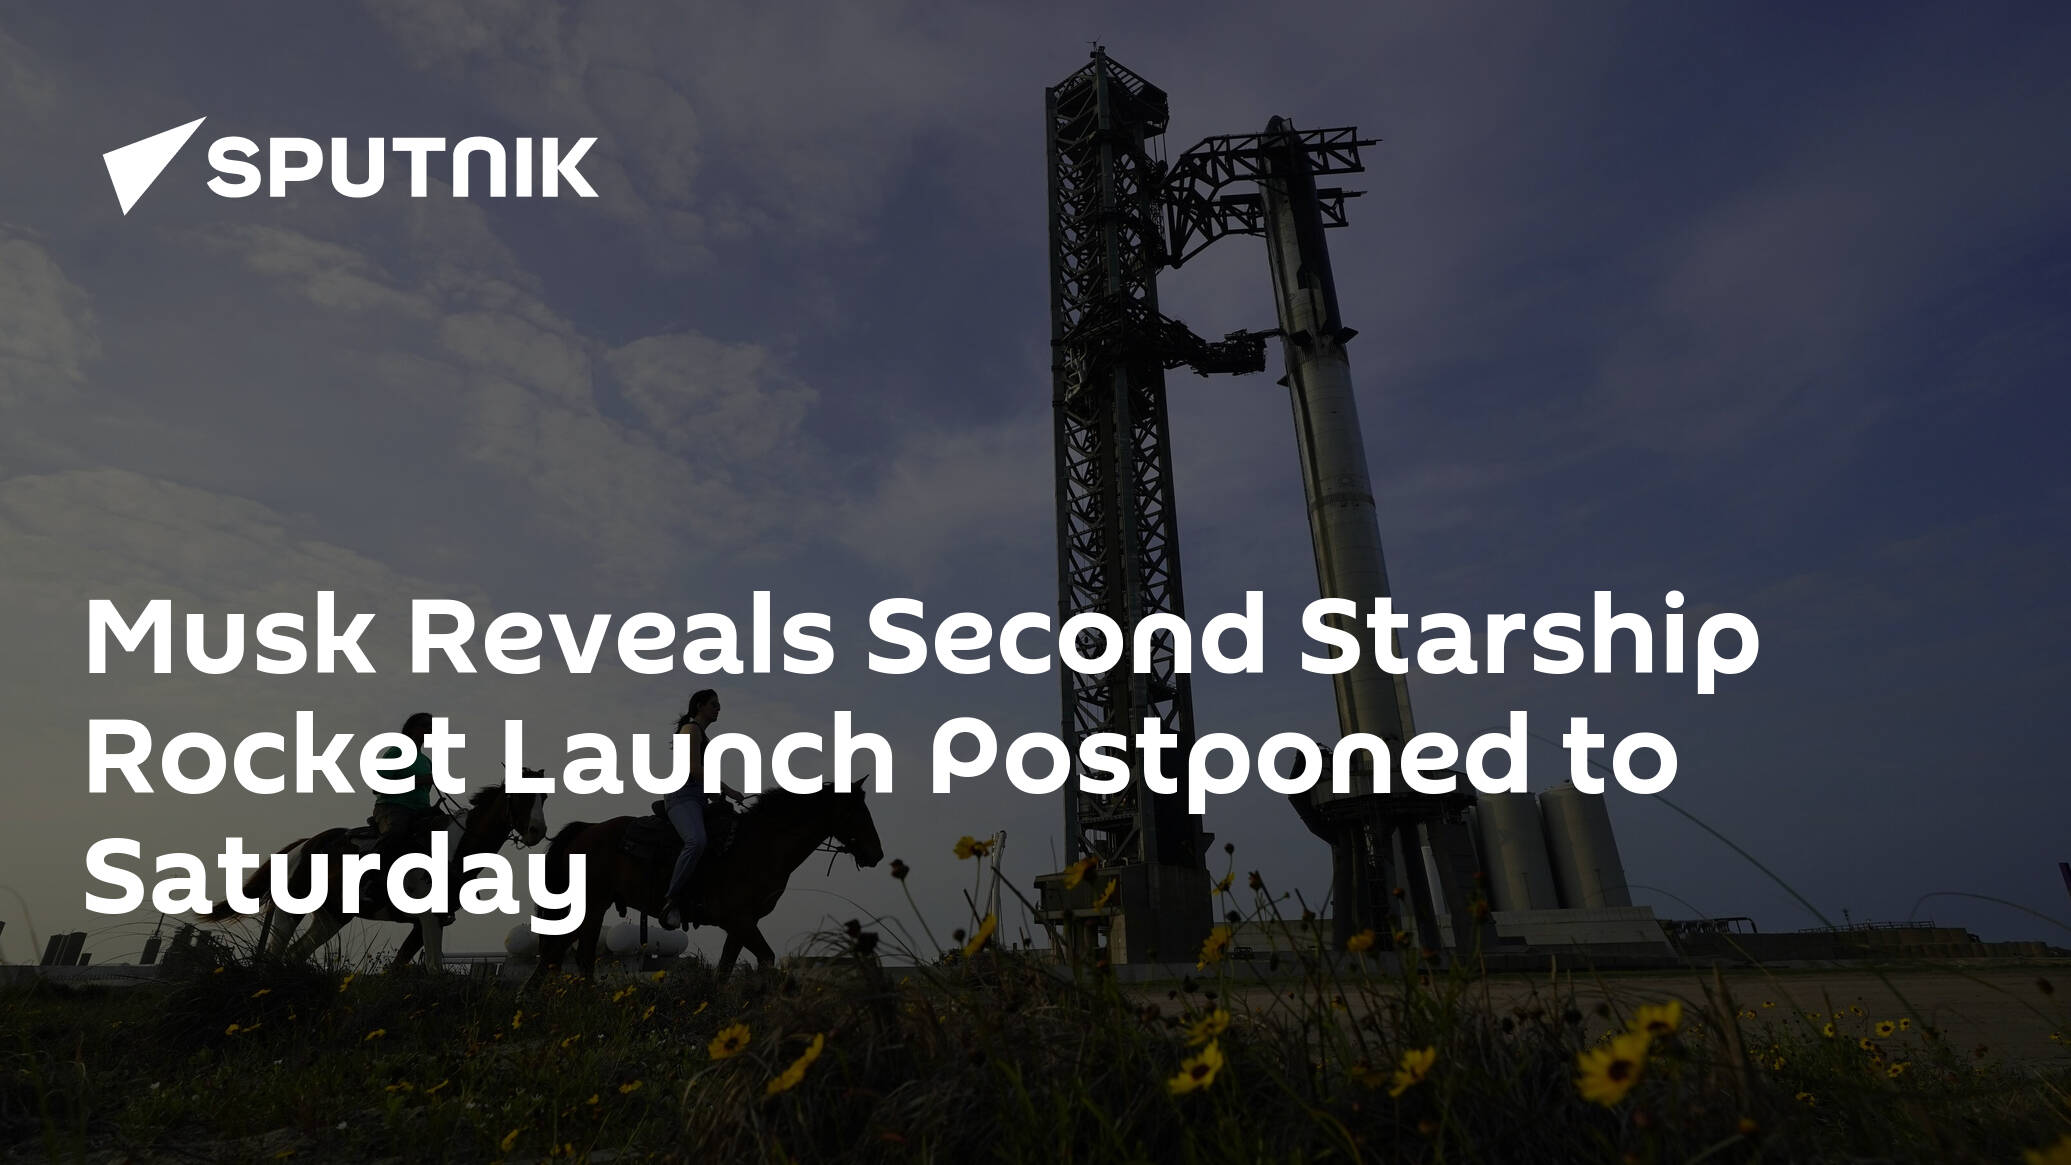 Musk Reveals Second Starship Rocket Launch Postponed to Saturday